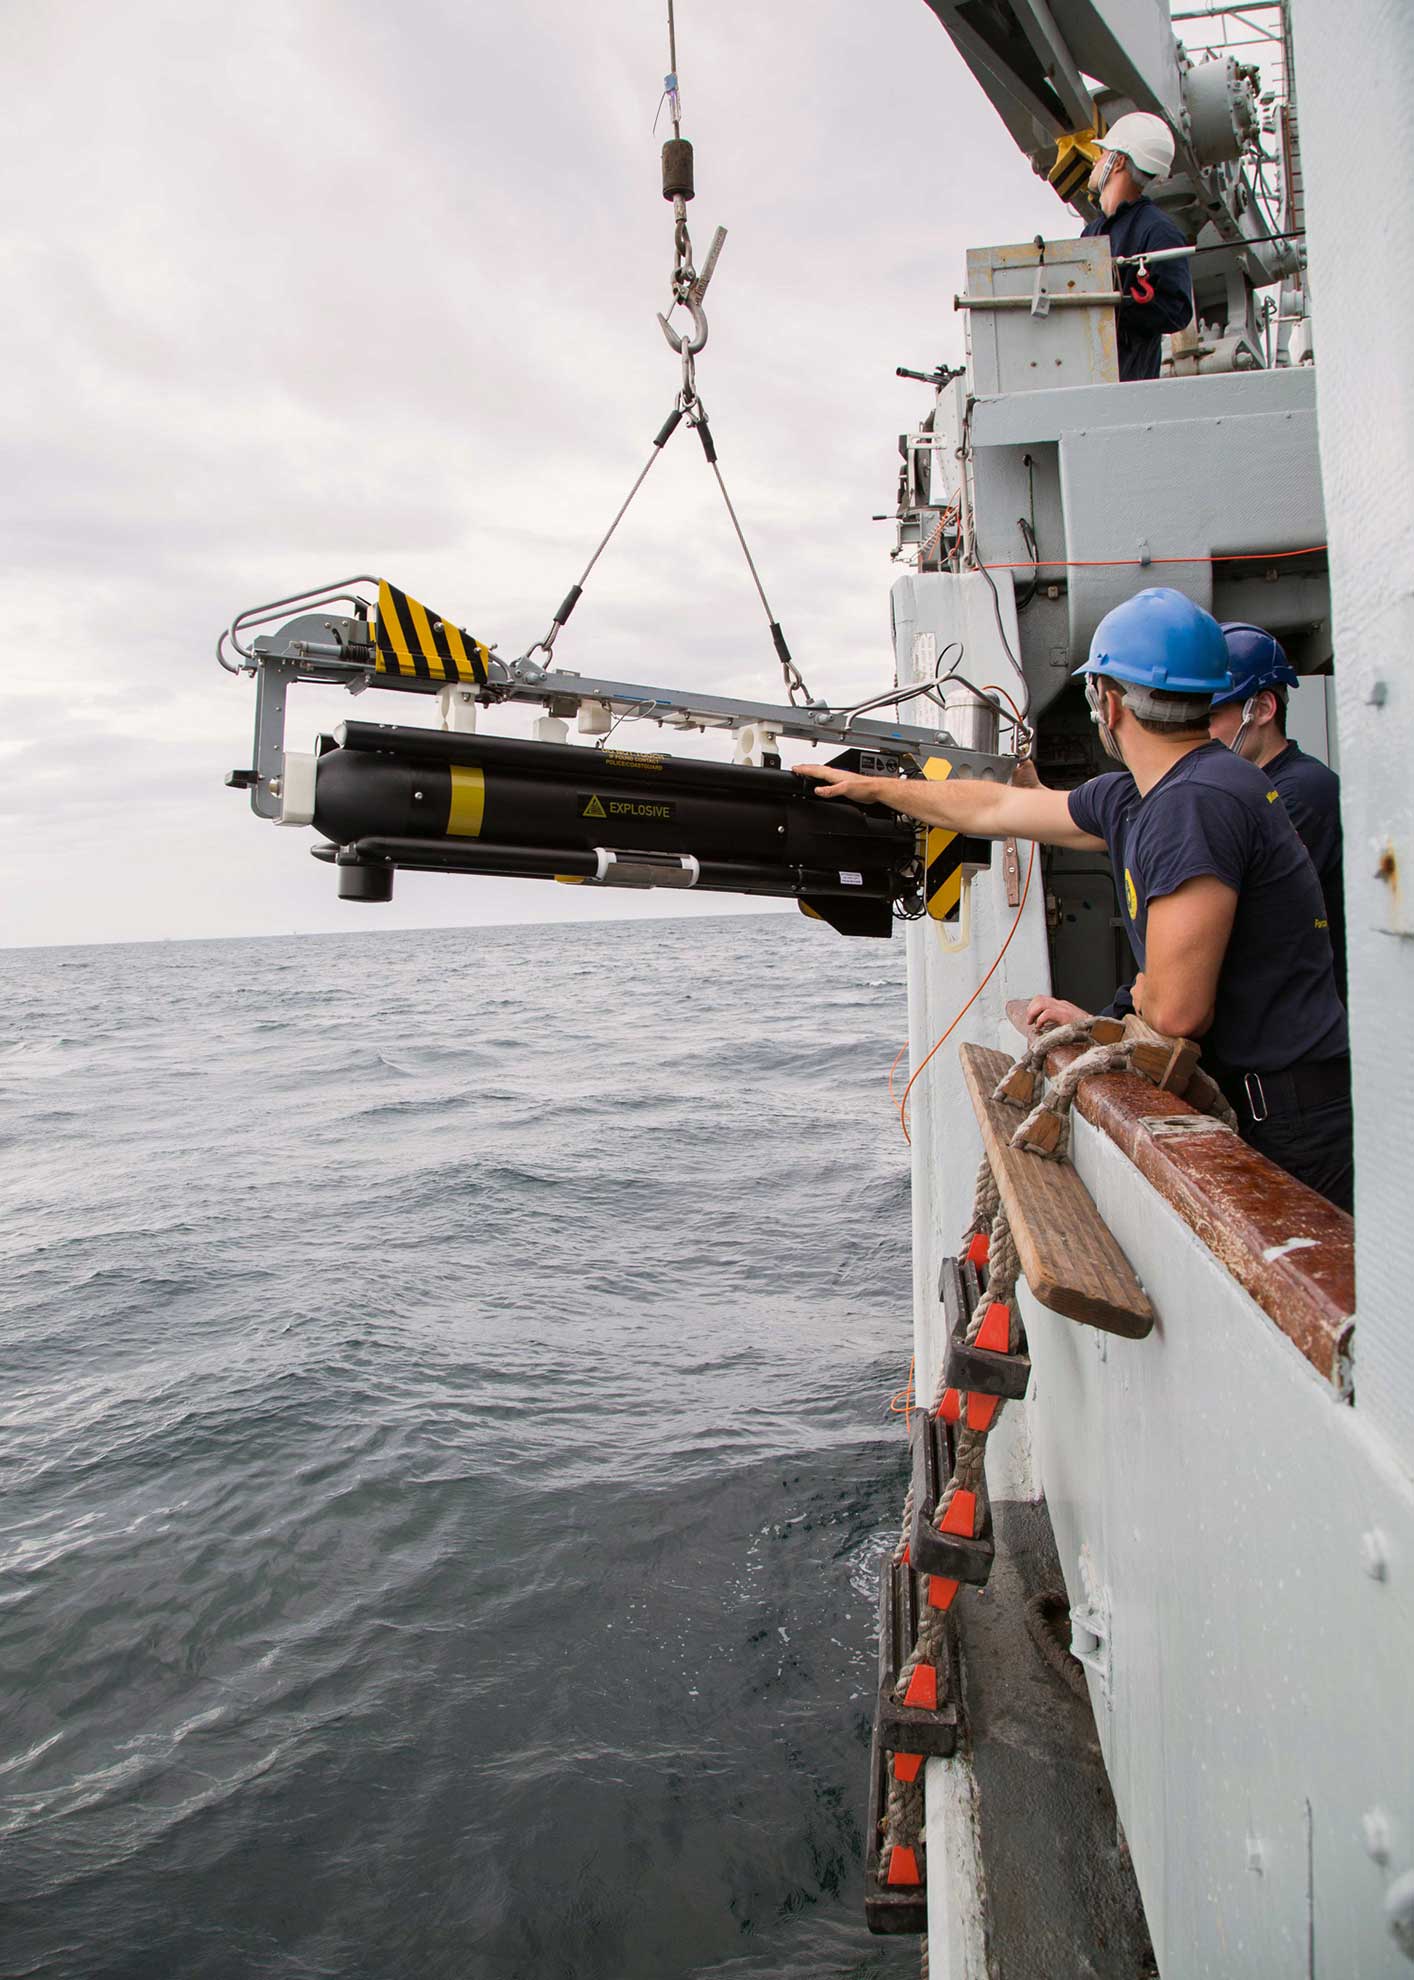 Arabian Gulf (April 13, 2019) Royal Navy sailors hoist a Sea Fox C-Round Mine Disposal System above the water, preparing to drop it in the sea for a training mission aboard the Royal Navy minehunter HMS Ledbury (M30) during Artemis Trident 19. Artemis Trident is a mine countermeasures exercise conducted by France's Marine Nationale, the United Kingdom's Royal Navy and the U.S. Navy in the Arabian Gulf focused on increasing interoperability and demonstrating the nations' shared commitment to ensuring unfettered maritime operations -- U.S. Army photo by Sgt. Sidney Weston. -